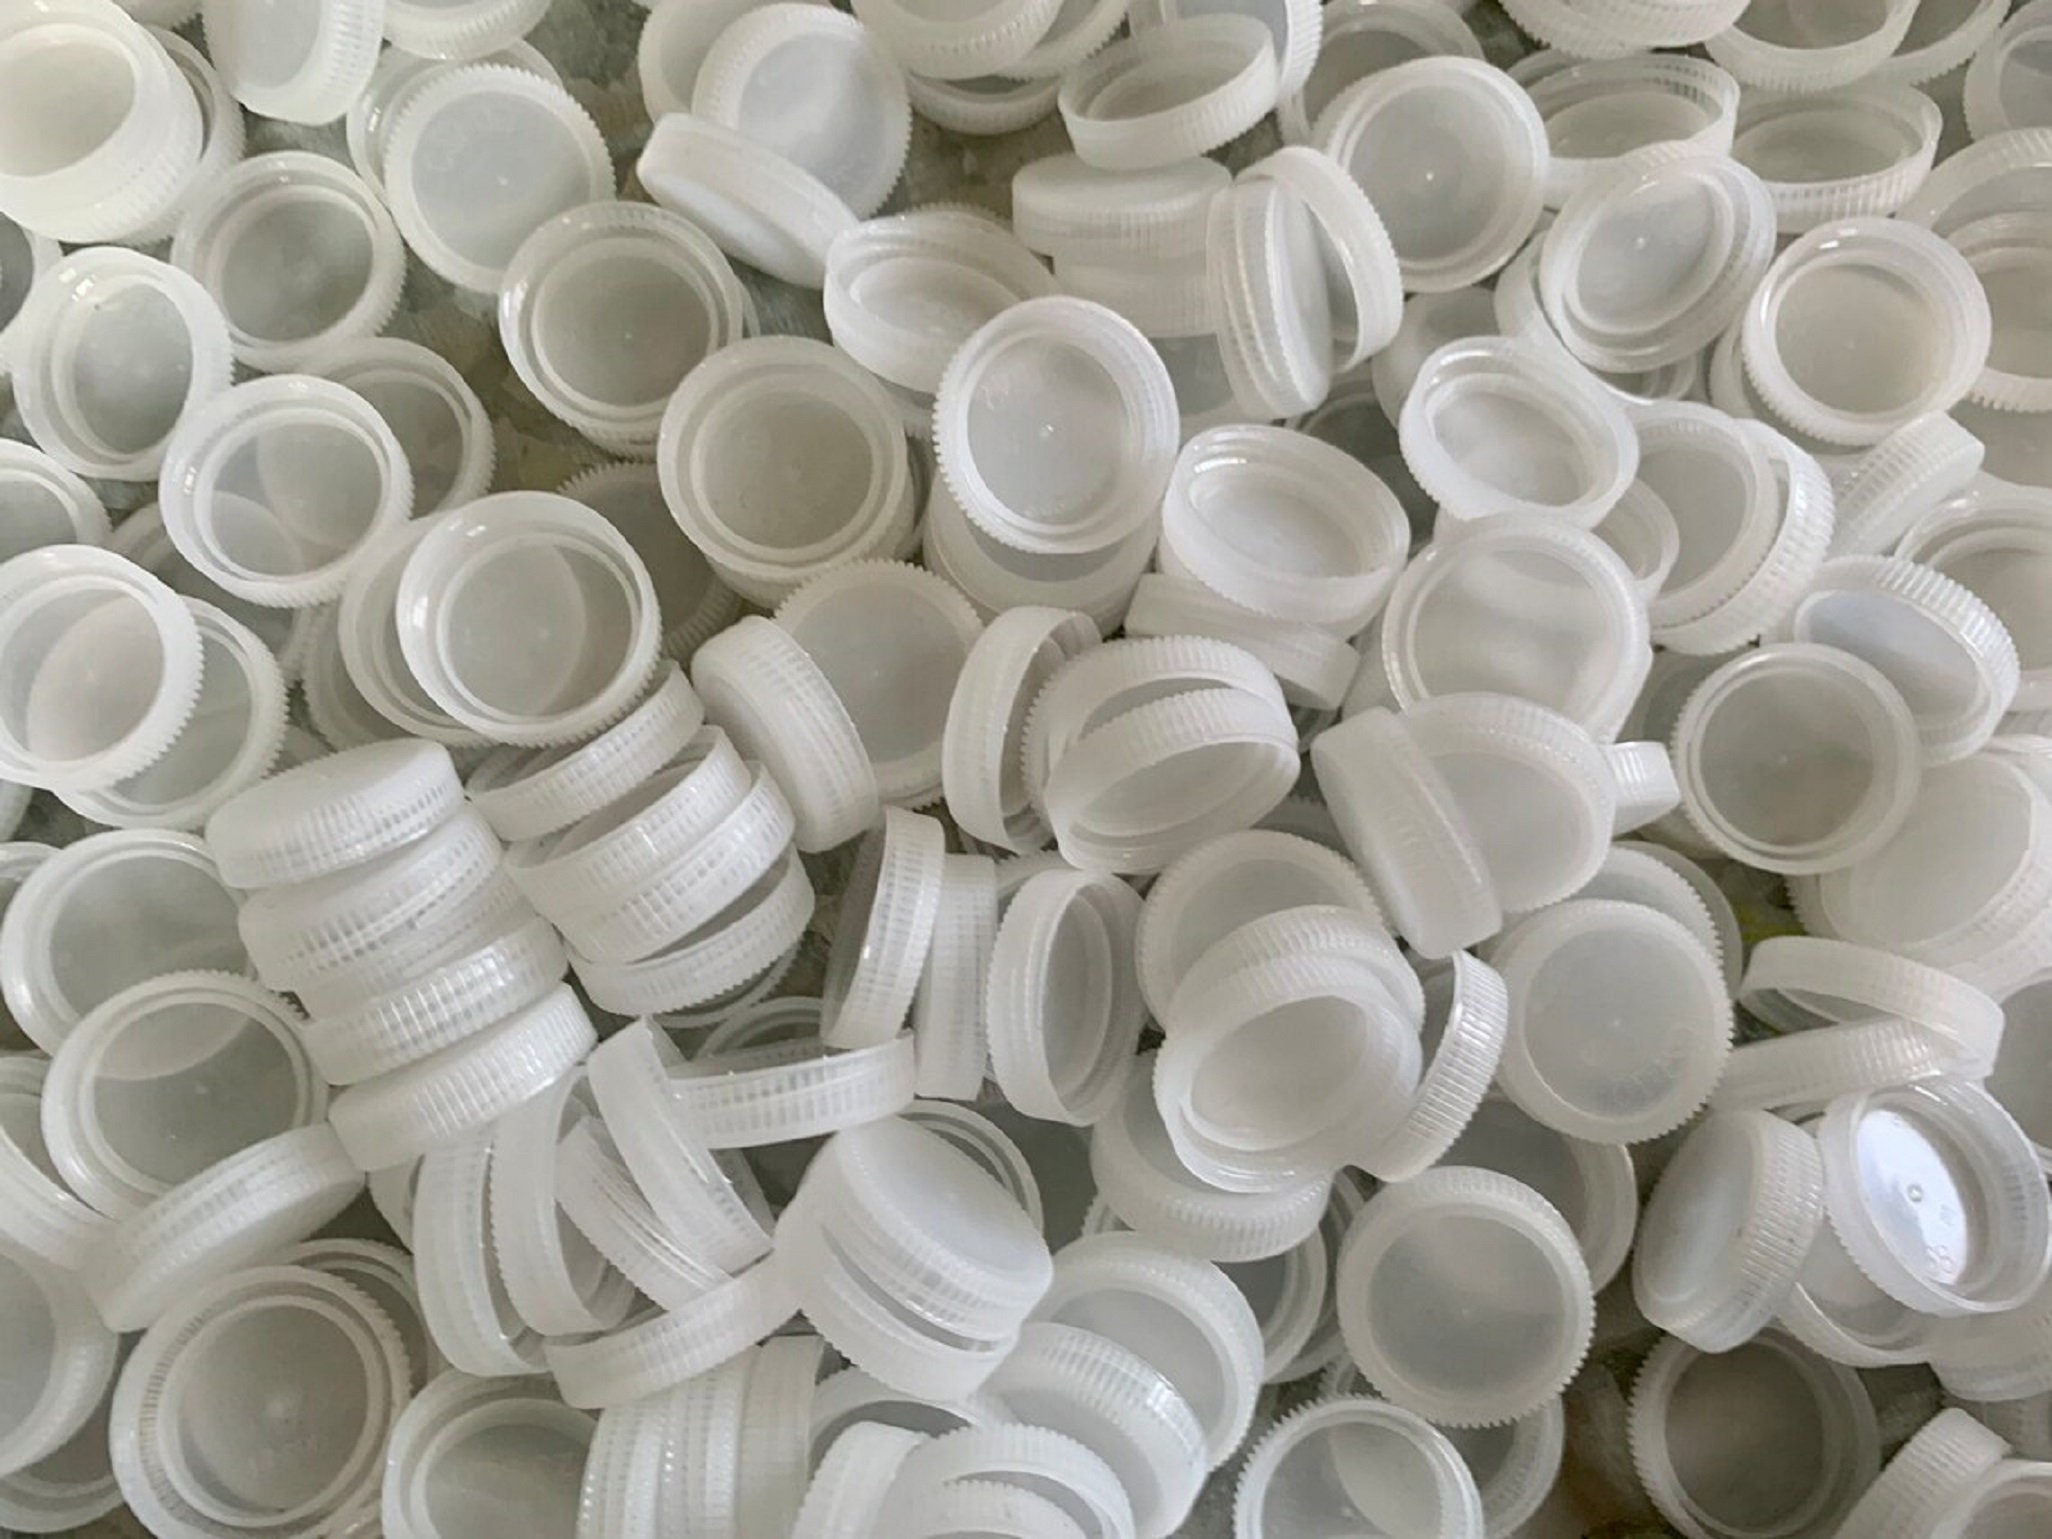 NST 3 Clear Plastic Rings 12 Pieces